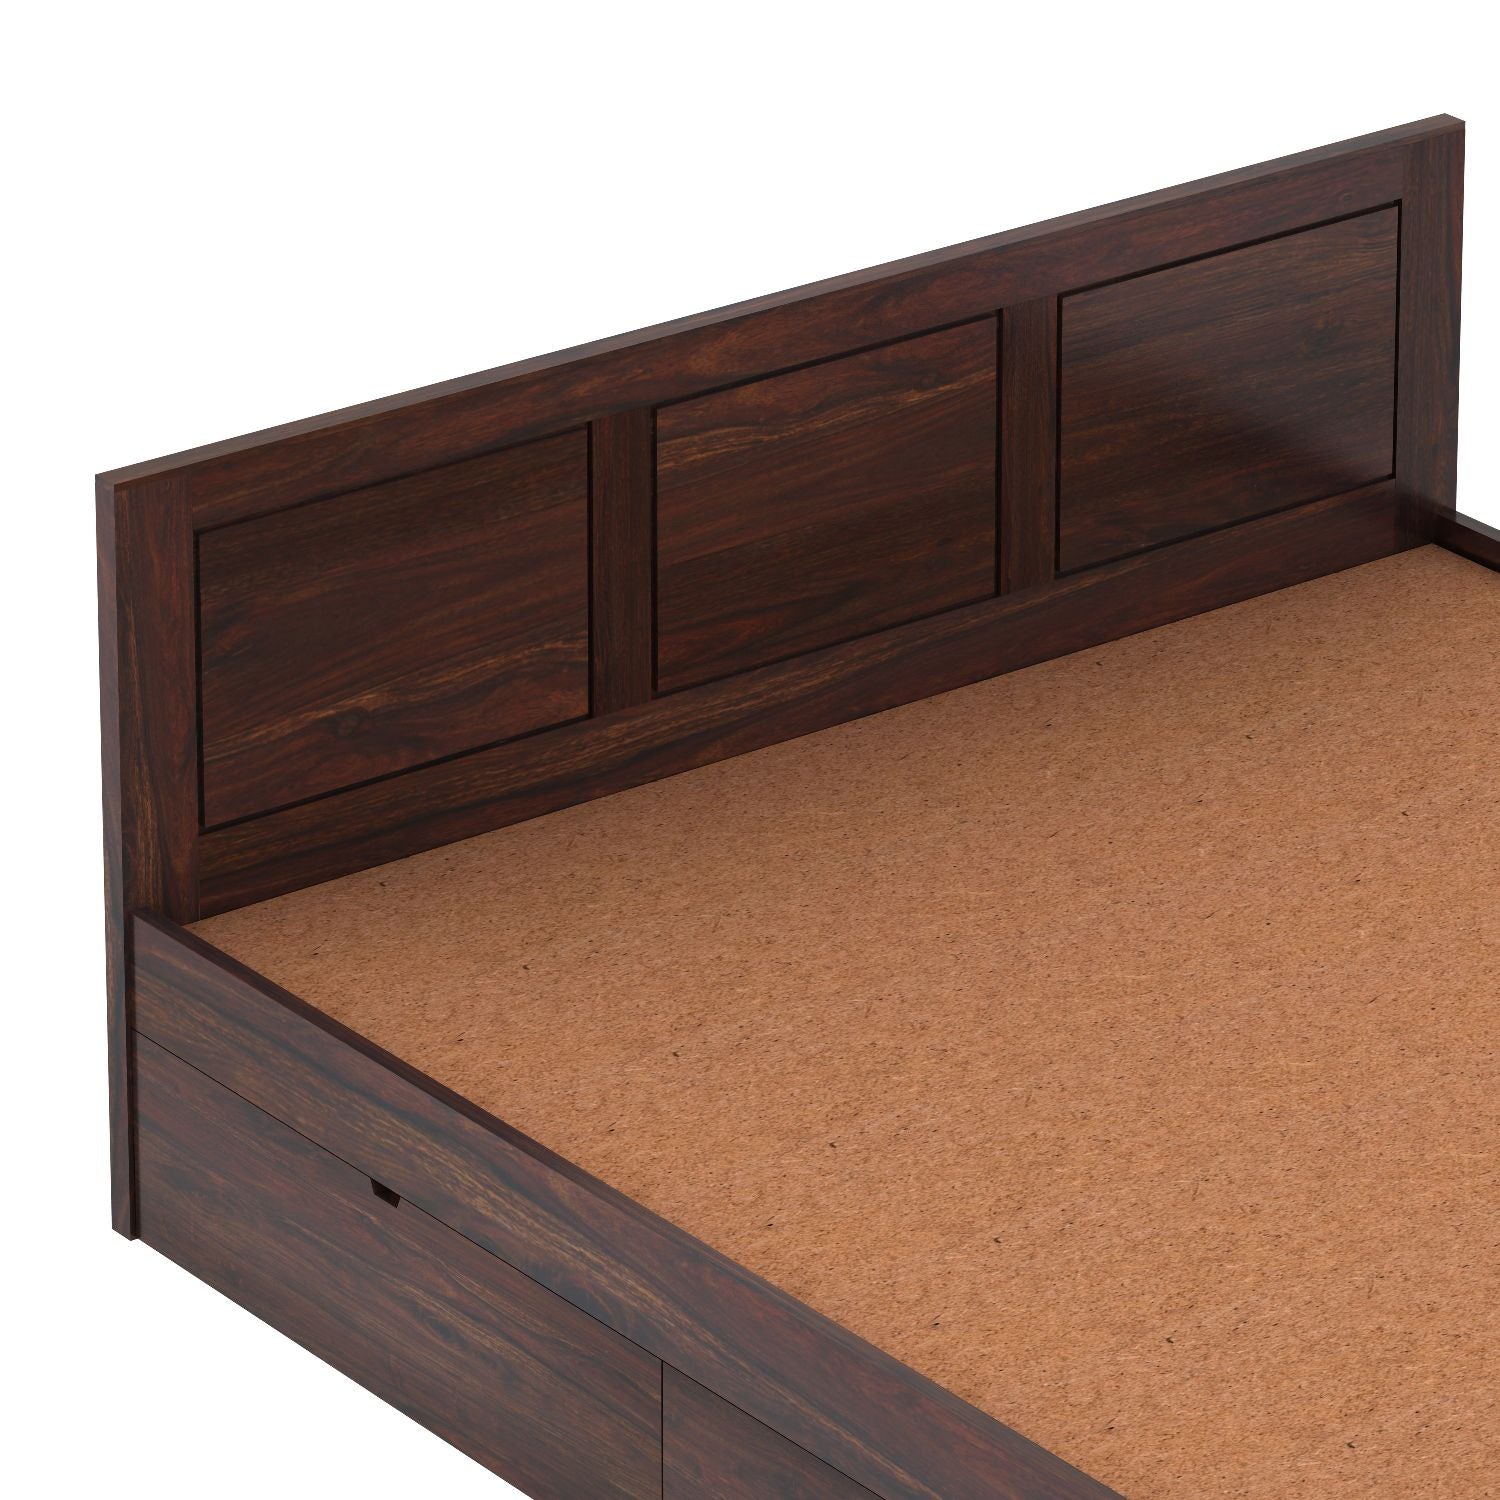 Woodwing Solid Sheesham Wood Bed With Four Drawers (King Size, Walnut Finish)